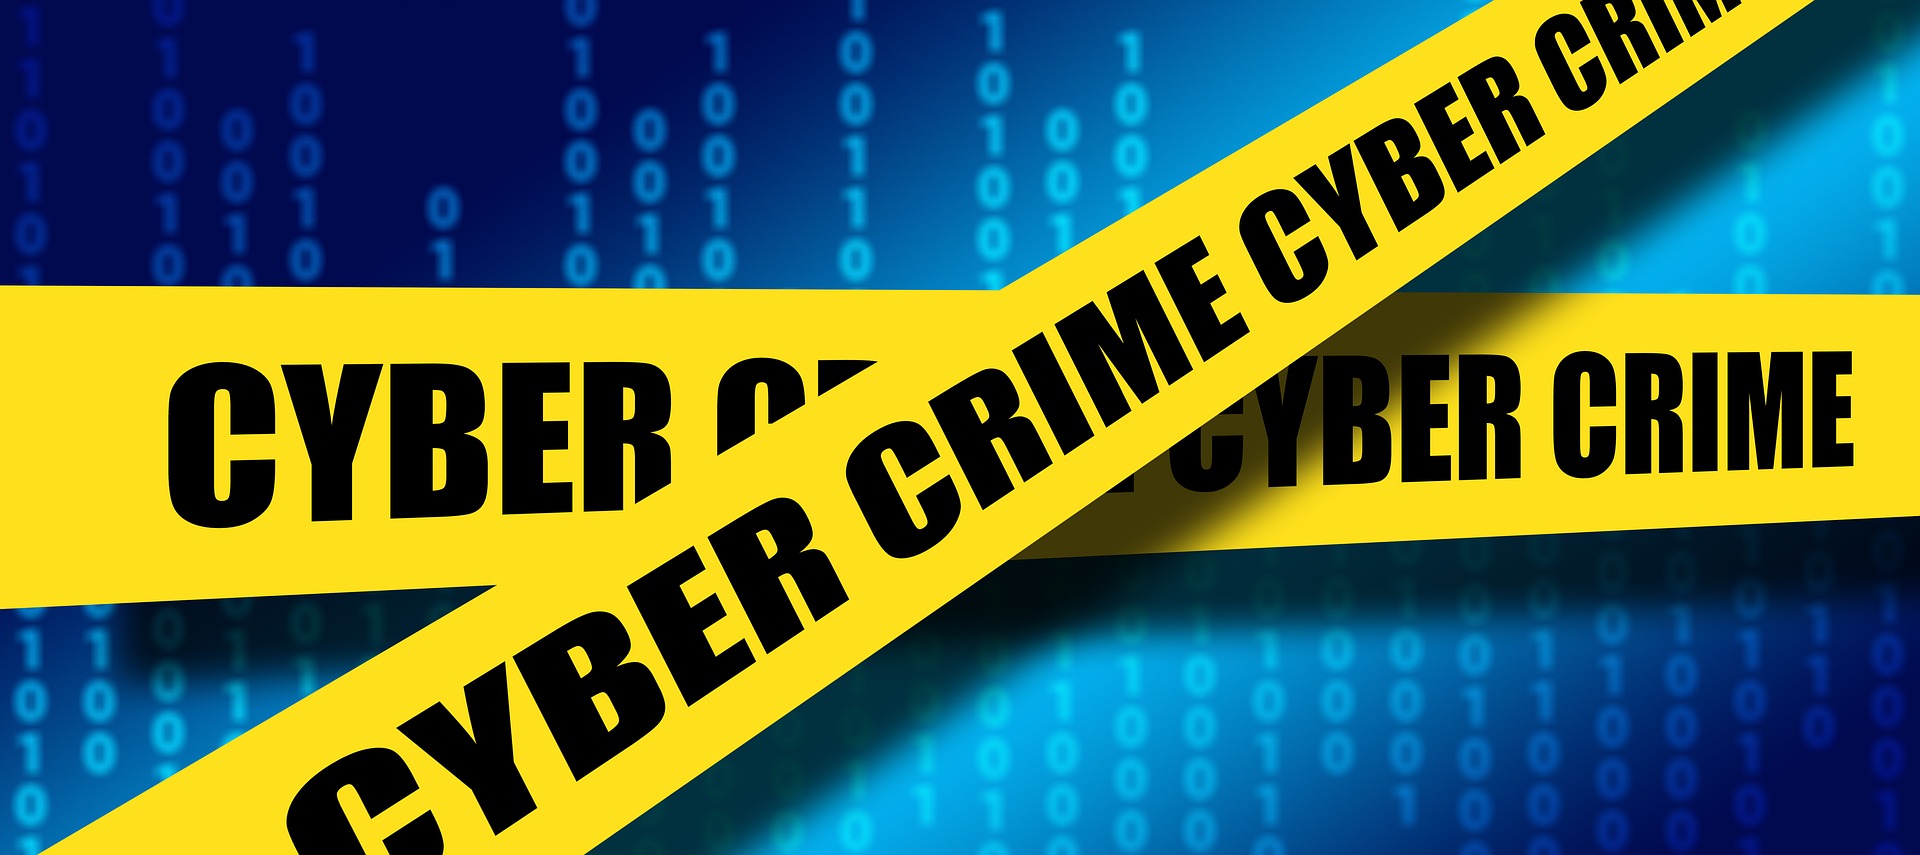 Cybercrime in Hollywood: Why hacking is portrayed more accurately than you think